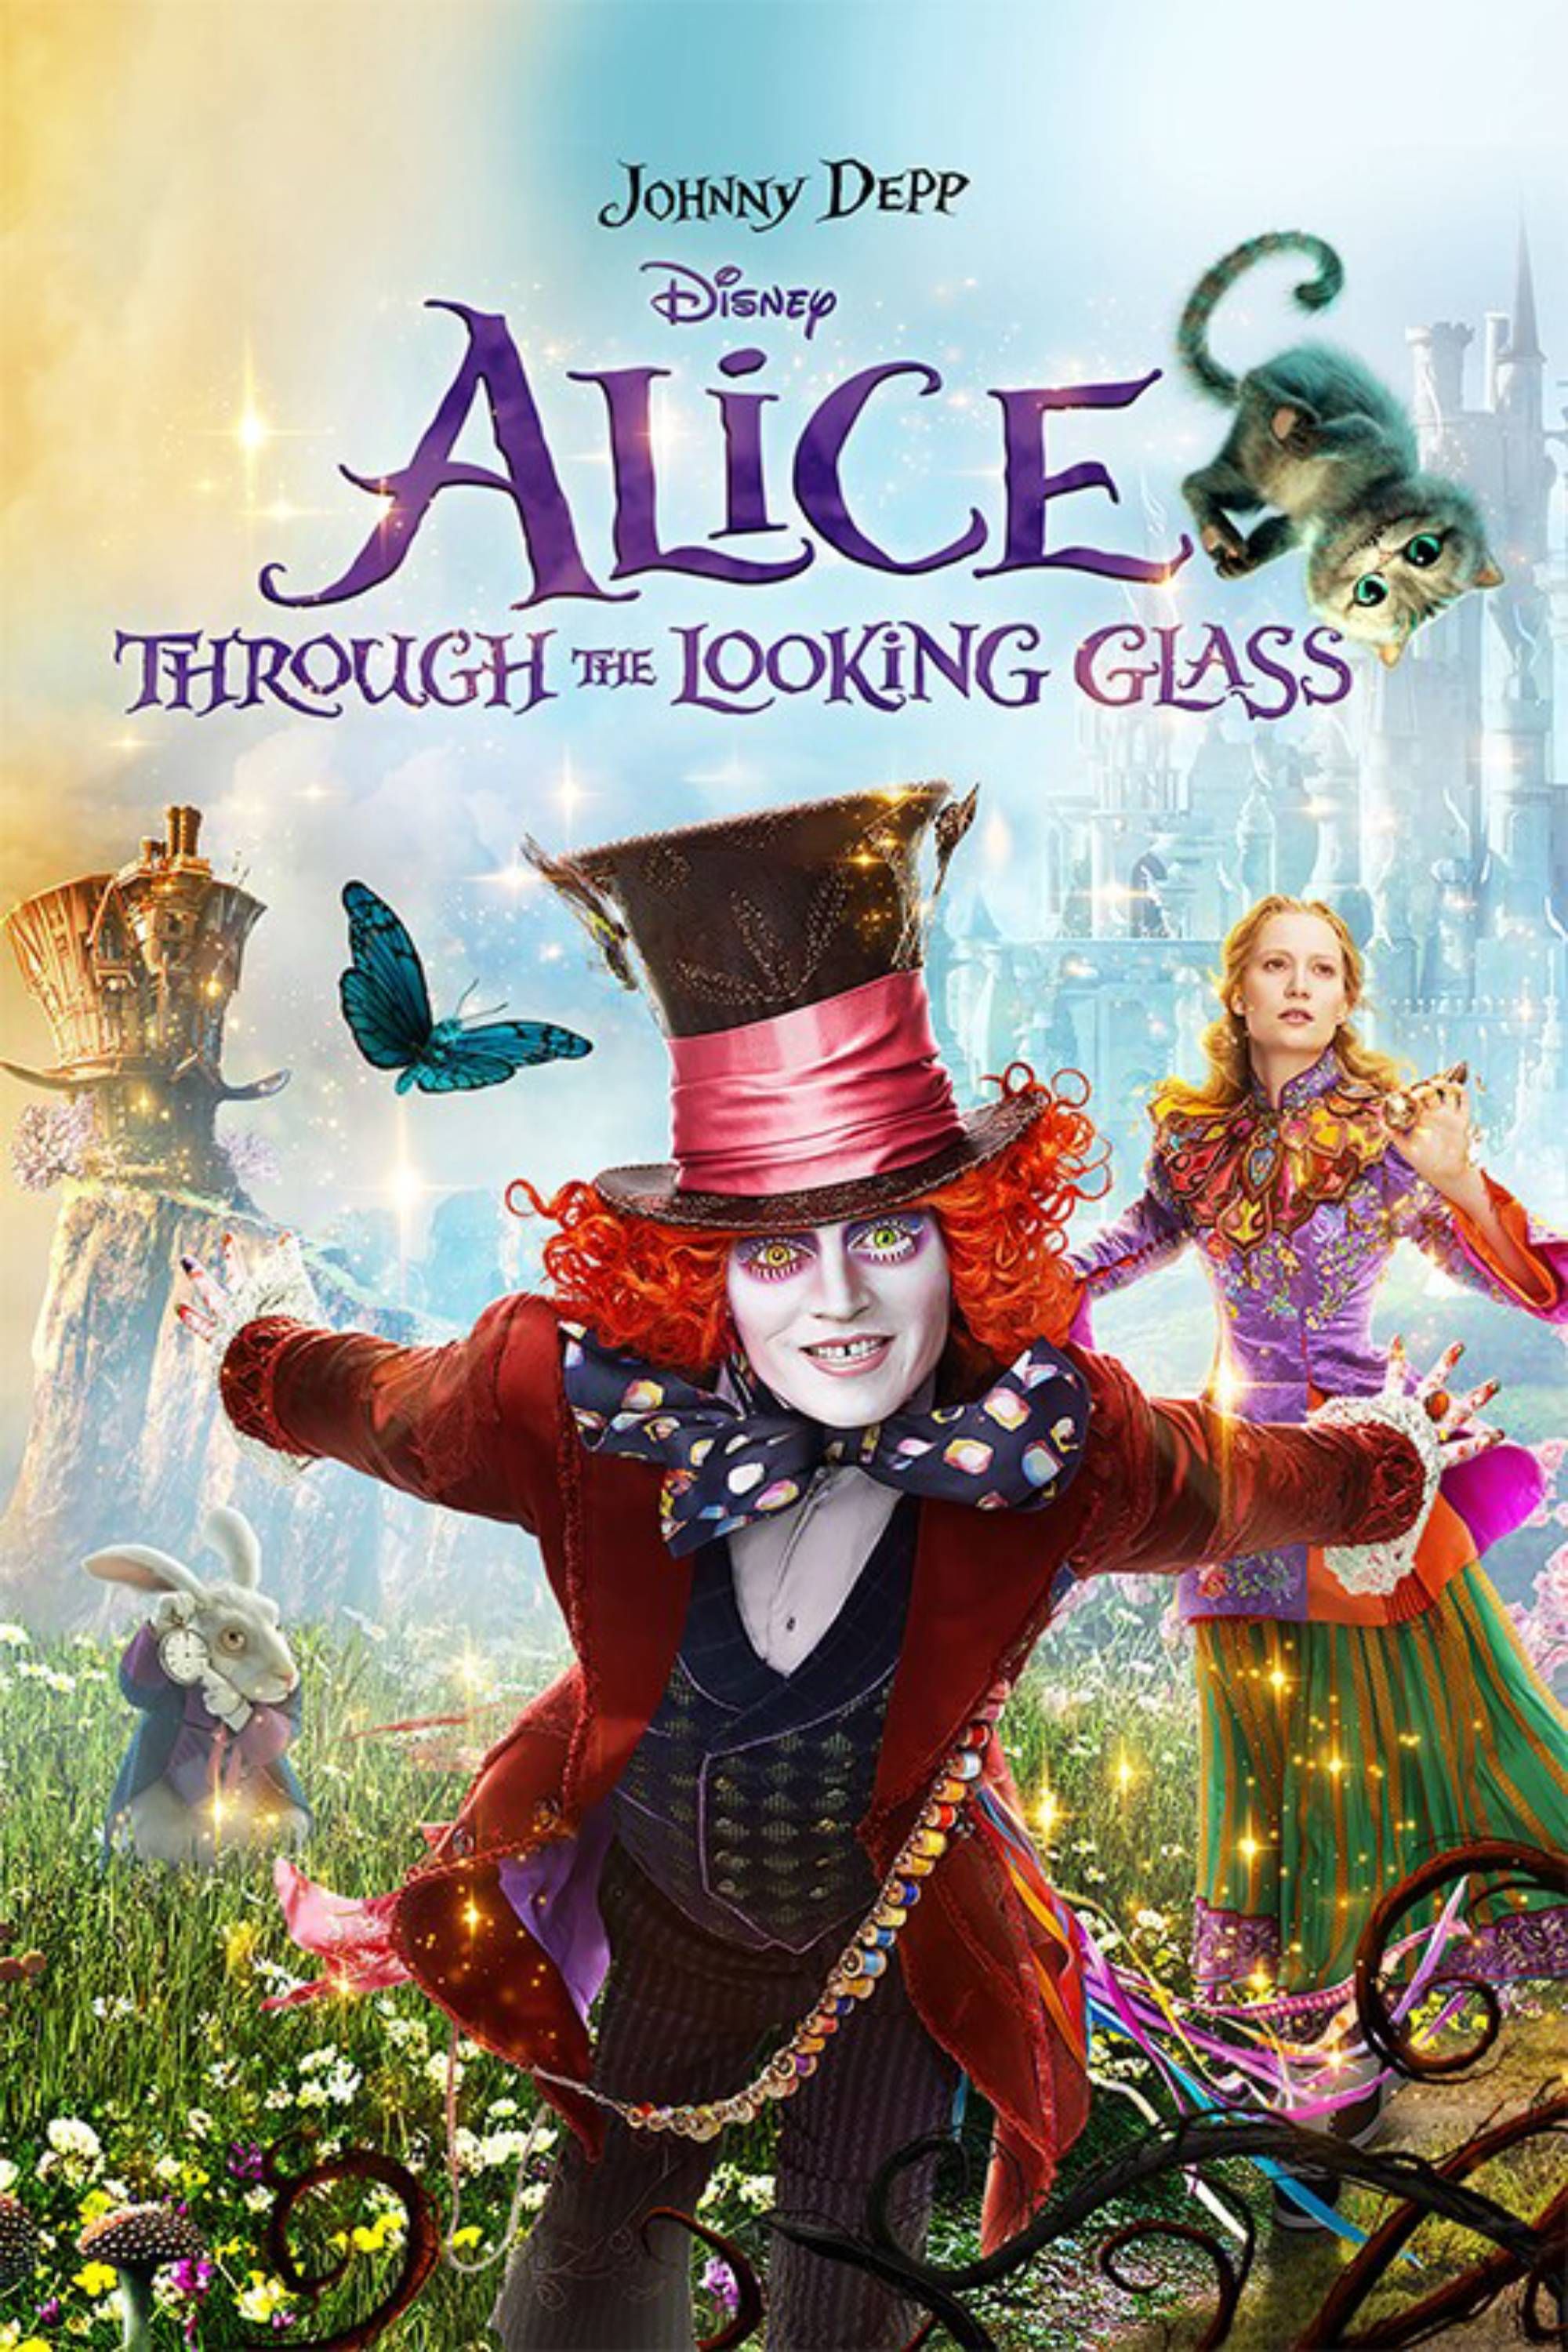 Alice Through the Looking Glass (2016) - Poster - Johnny Depp